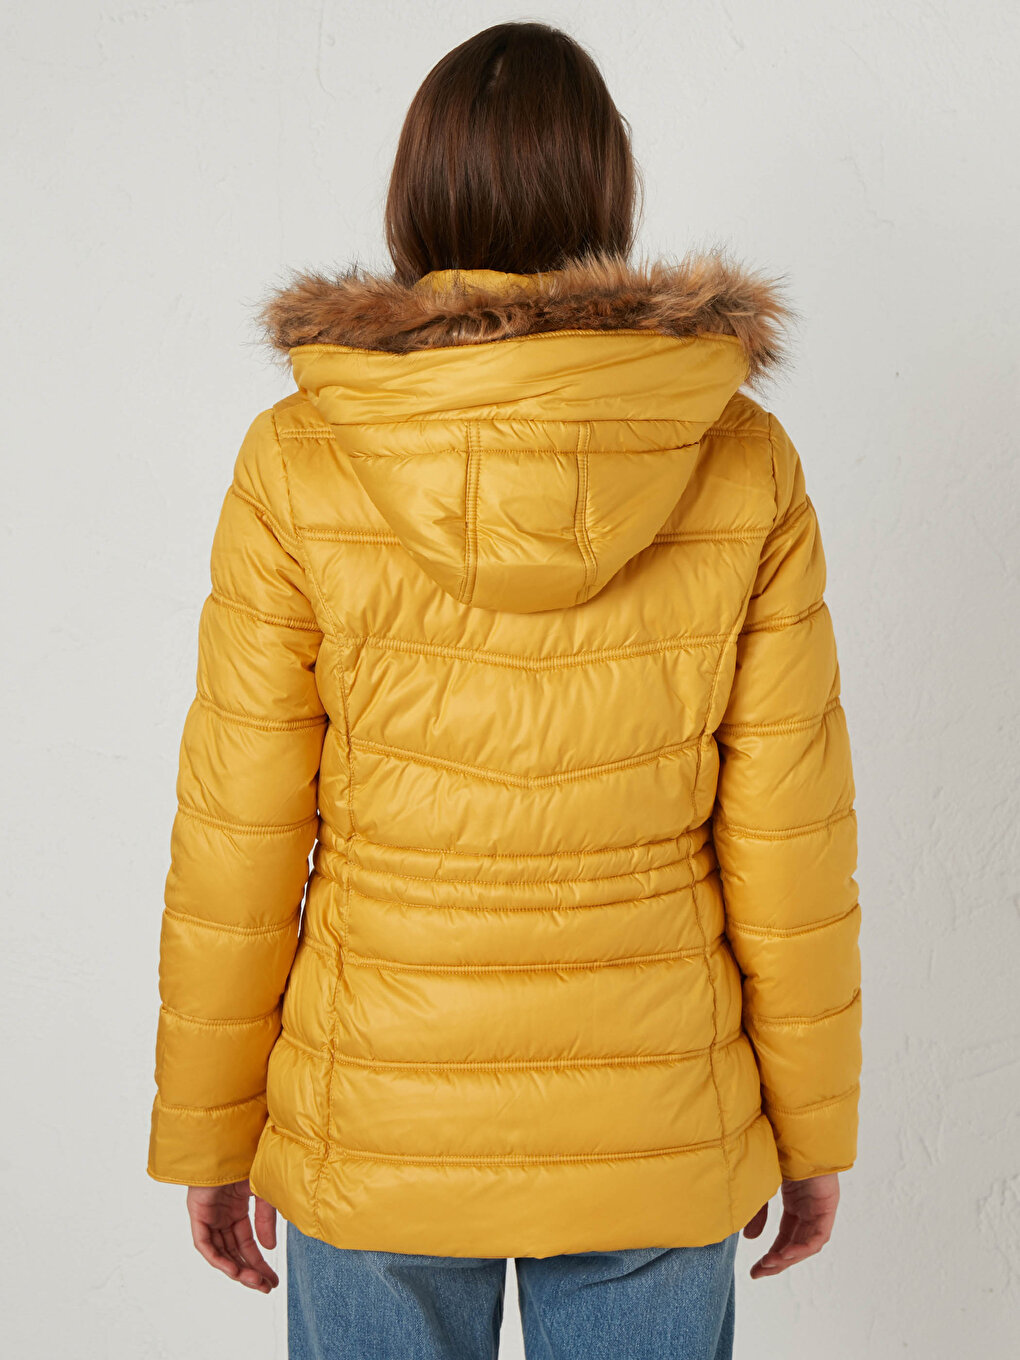 zanvin Womens Long Puffer Thick Jacket Plus Size Down Coat Cotton Cover  Coat Lightweight Down Coat With Hood Winter Jacket,Yellow,M